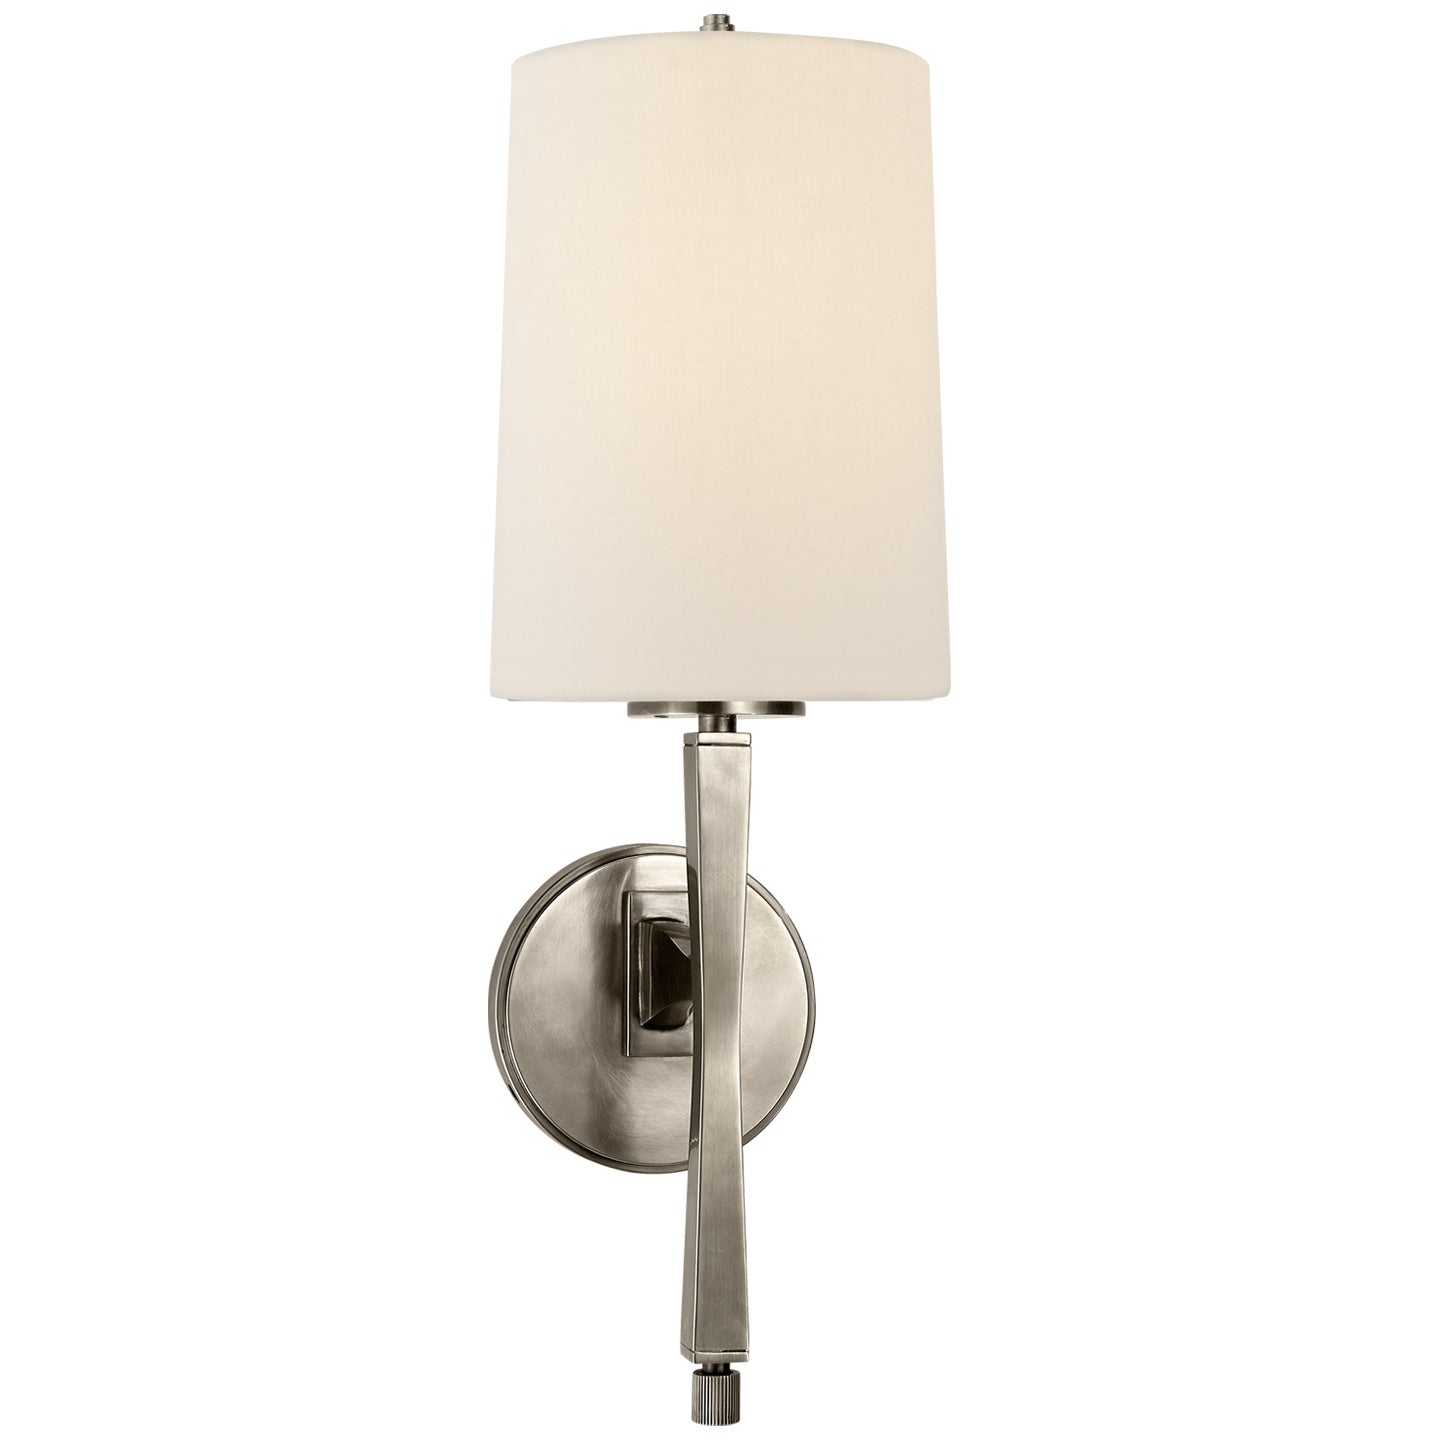 Load image into Gallery viewer, Visual Comfort Signature - TOB 2740AN-L - One Light Wall Sconce - Edie - Antique Nickel
